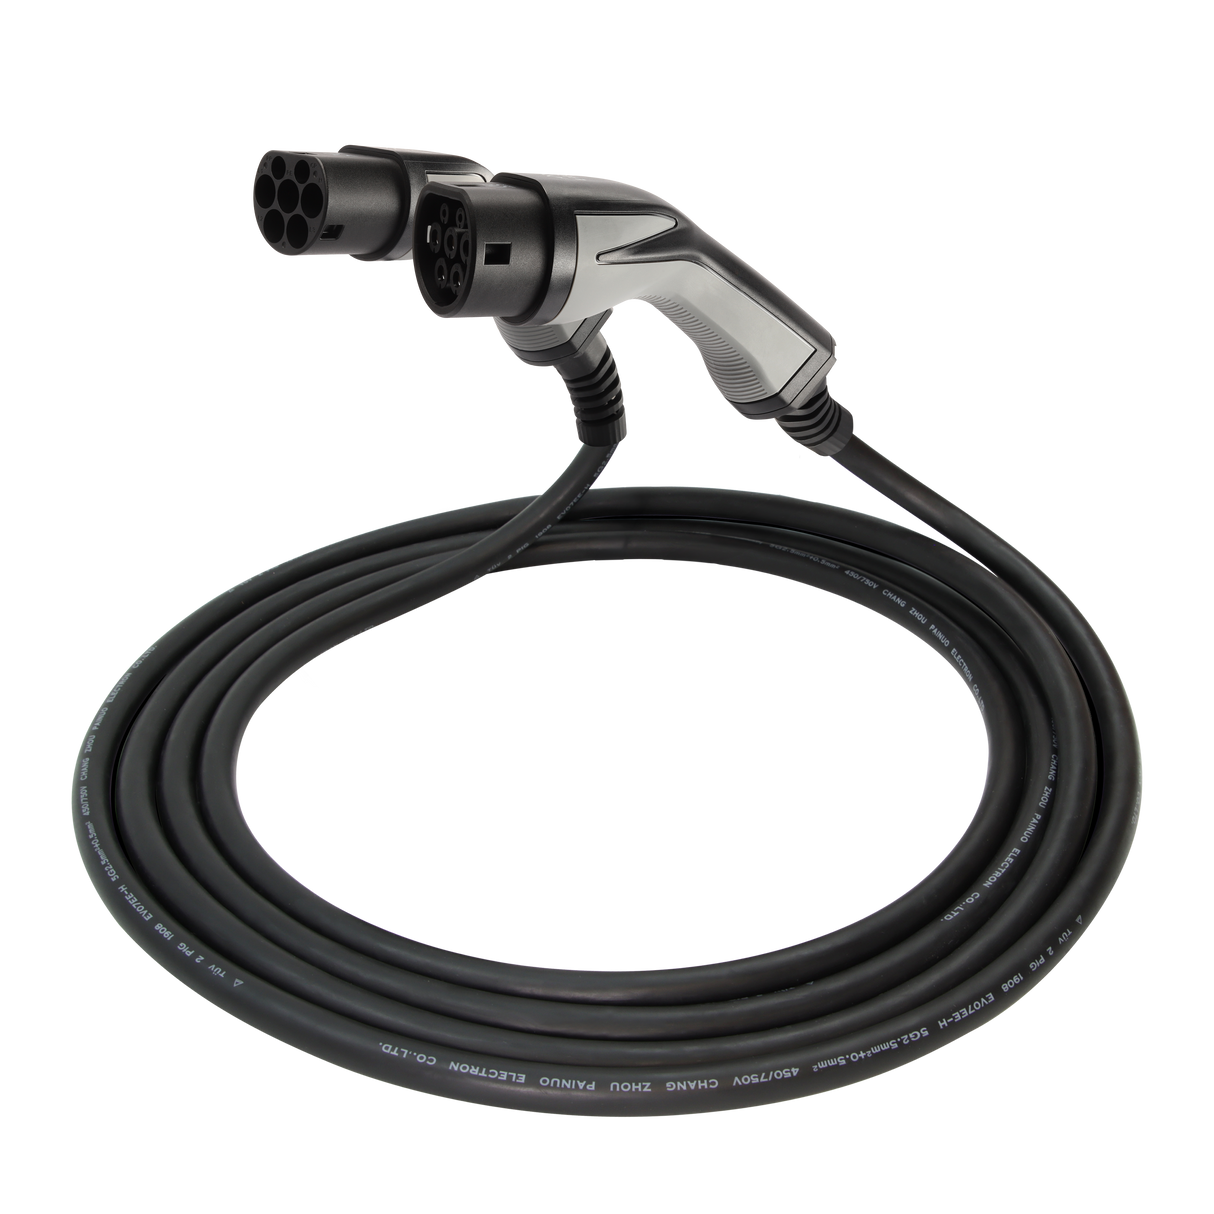 Charging cable Peugeot 3008 - Erock Pro Type 2 - 16A 1 phase (3.7 kW)